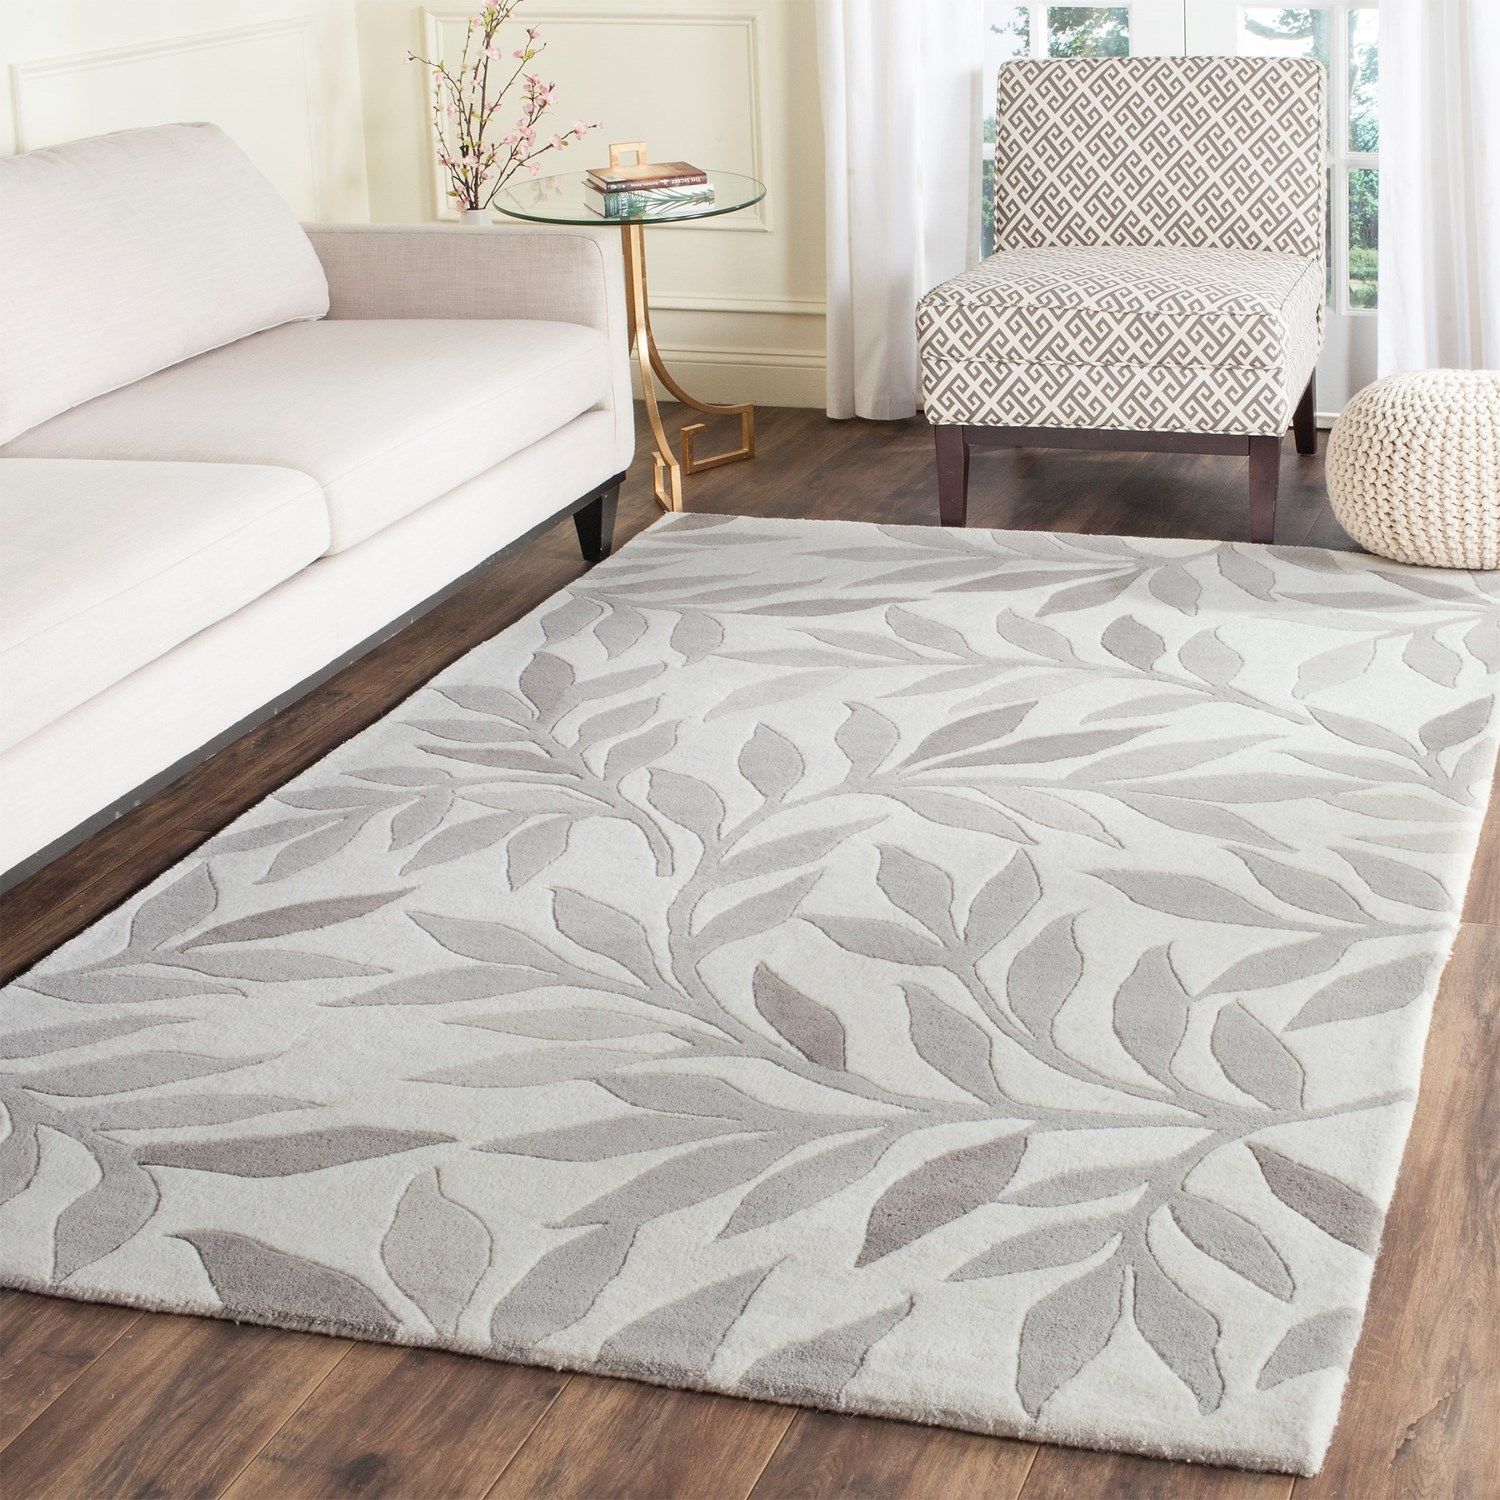 Martha Stewart Hand Tufted Wool Area Rug 4×6 Save 31 For Wool Area Rugs 4× (View 7 of 15)